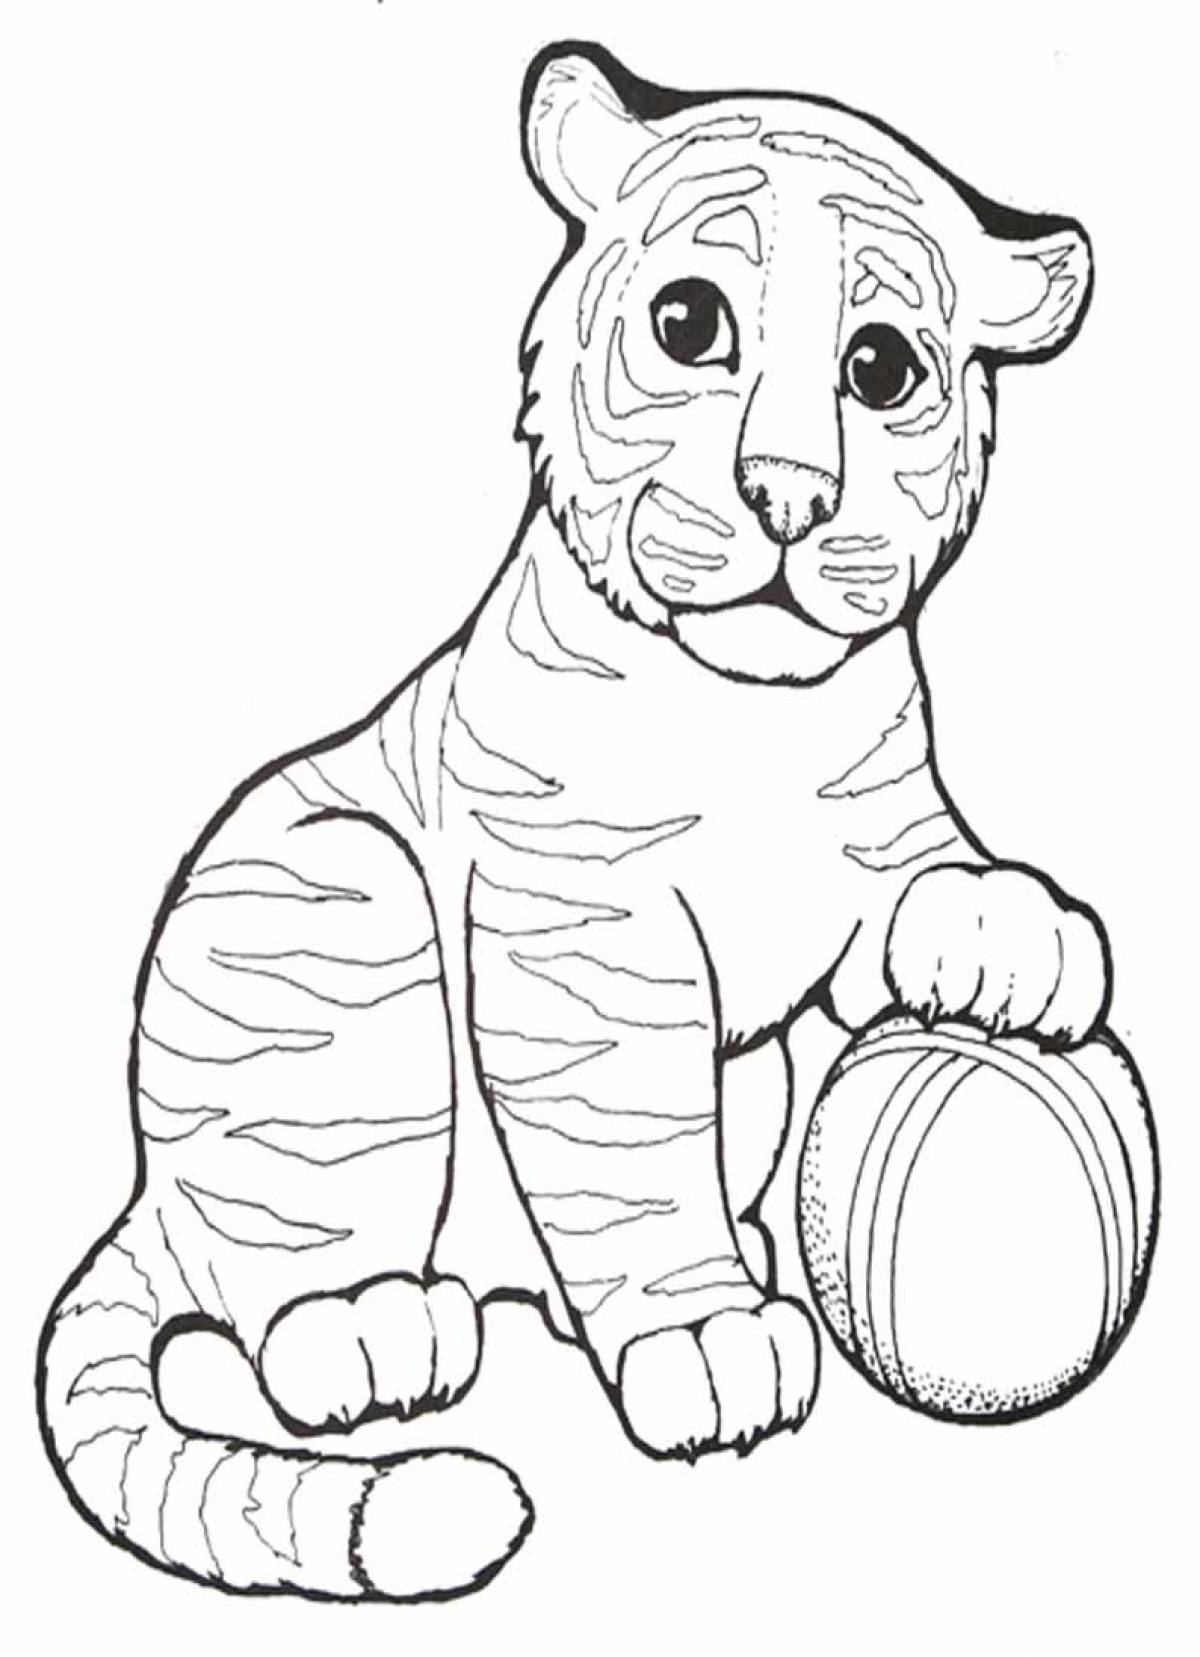 Tiger cub with a ball